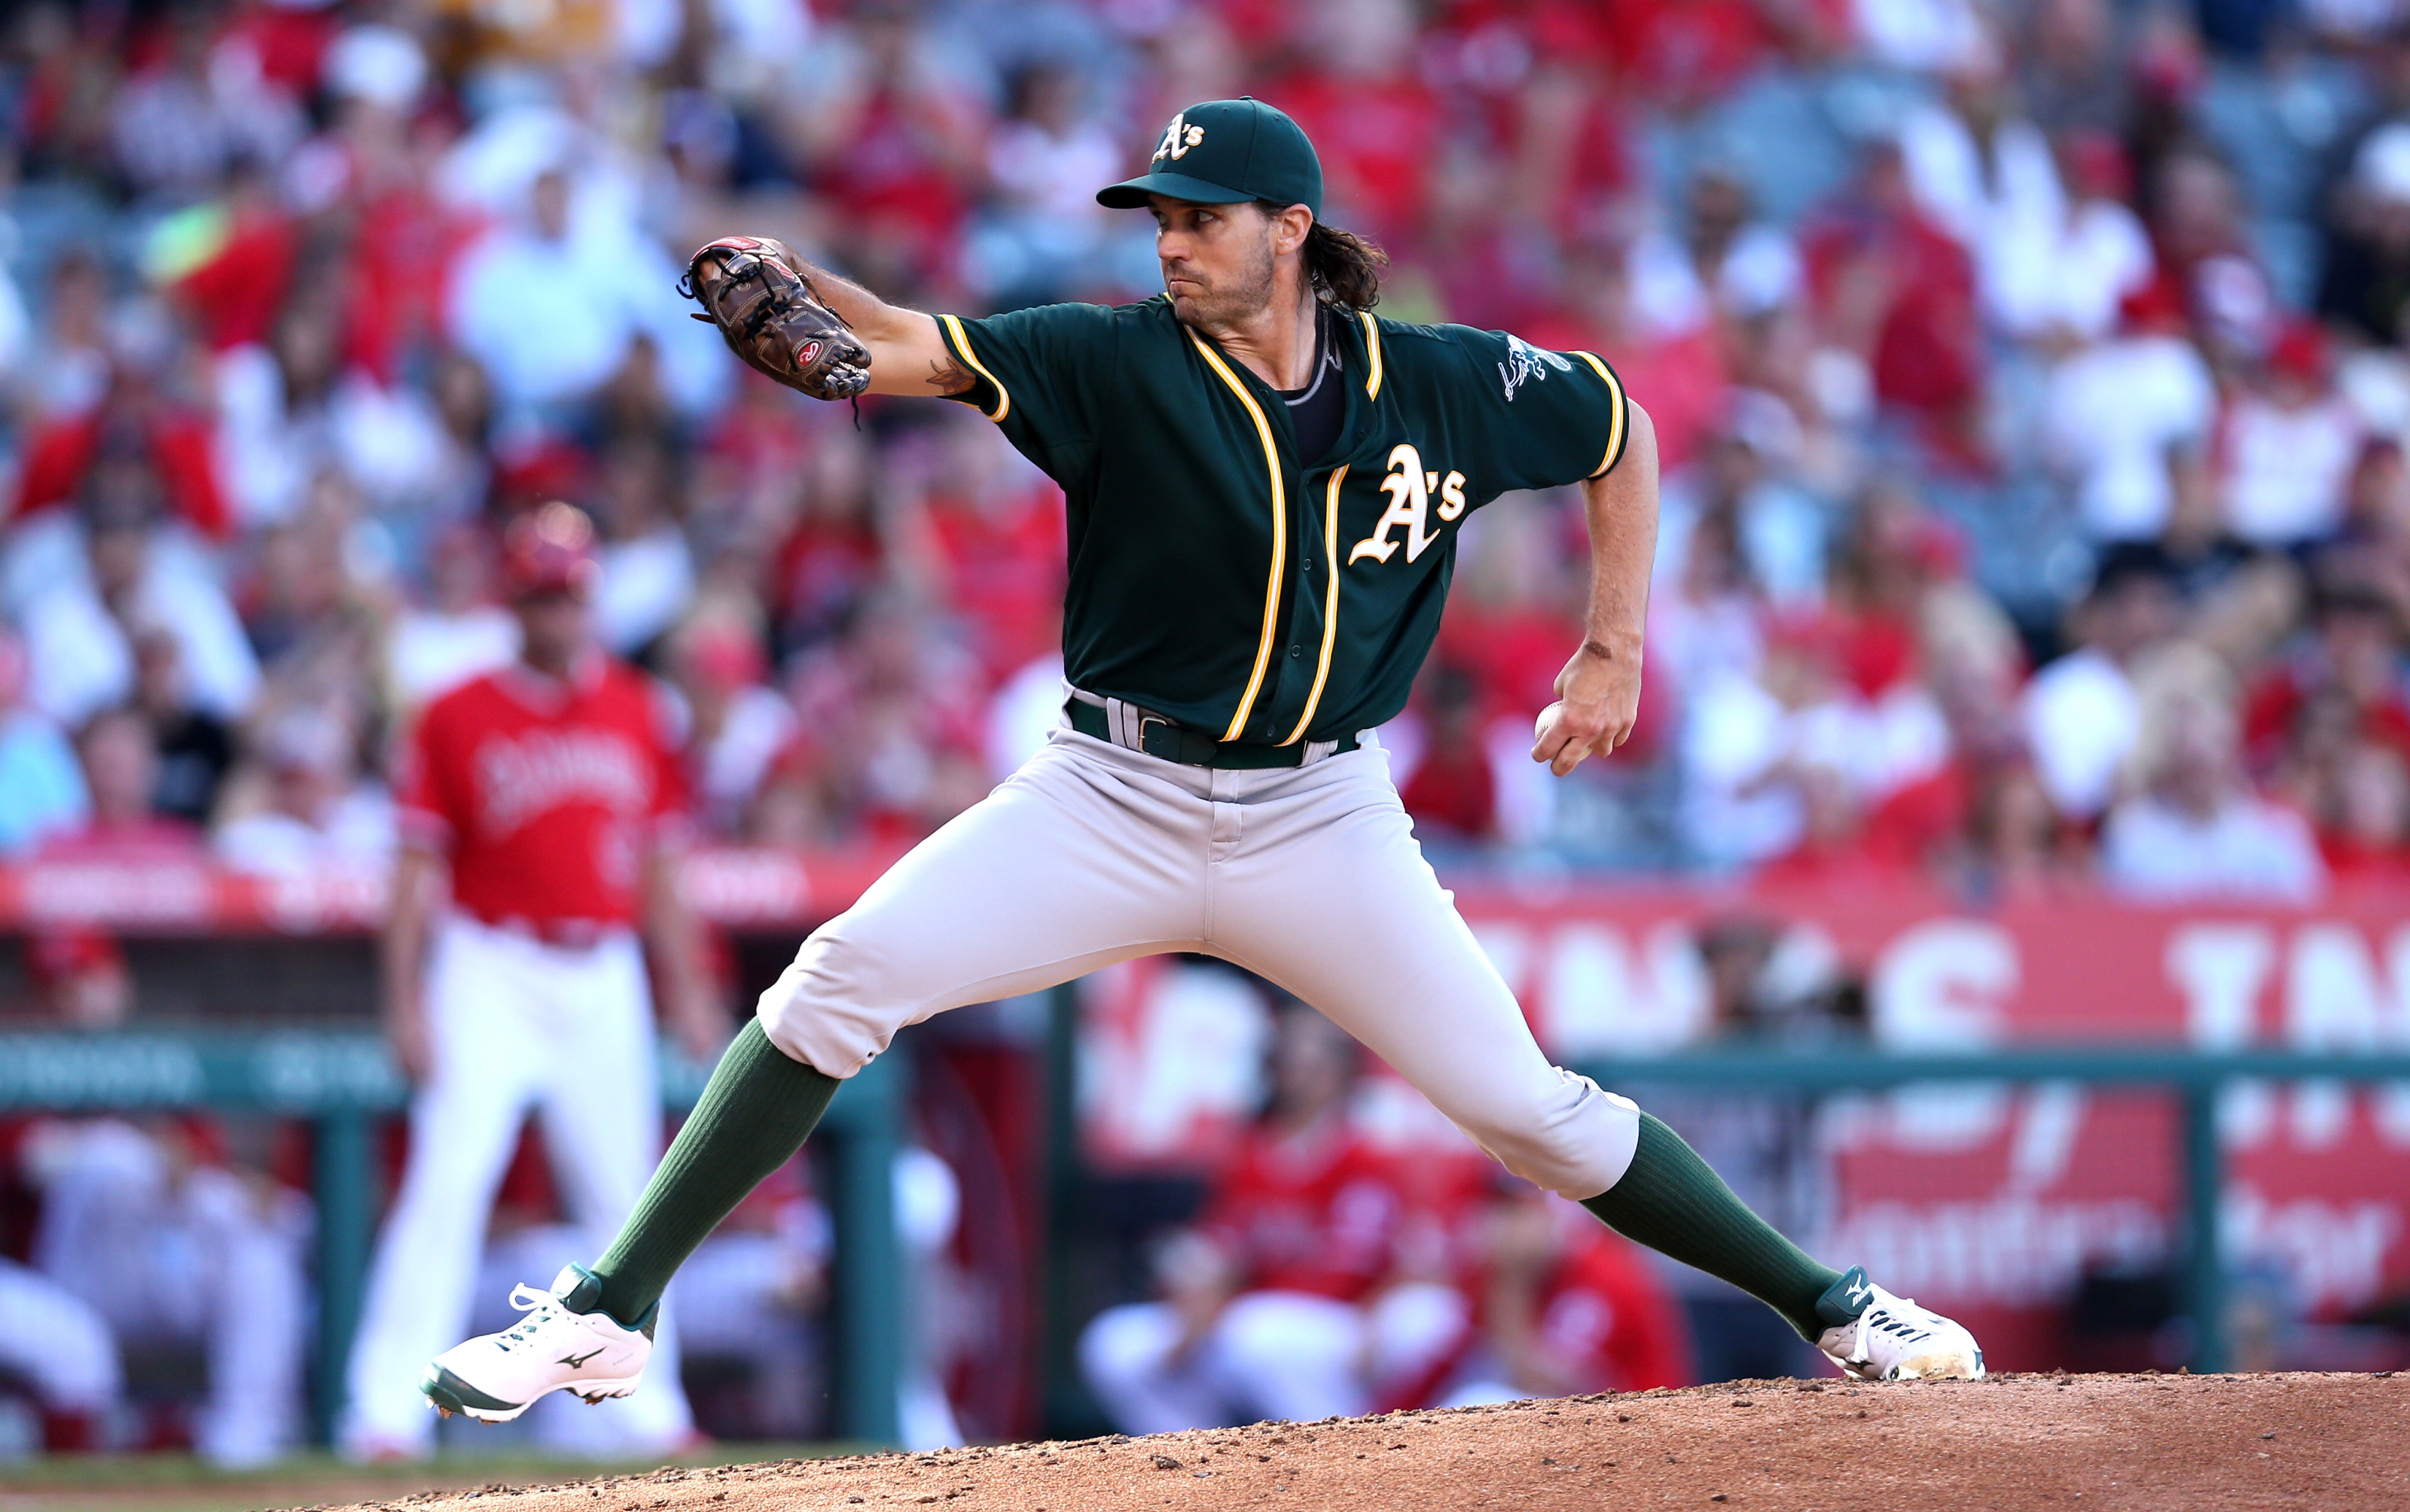 Exclusive interview with former Oakland Athletics pitcher Barry Zito